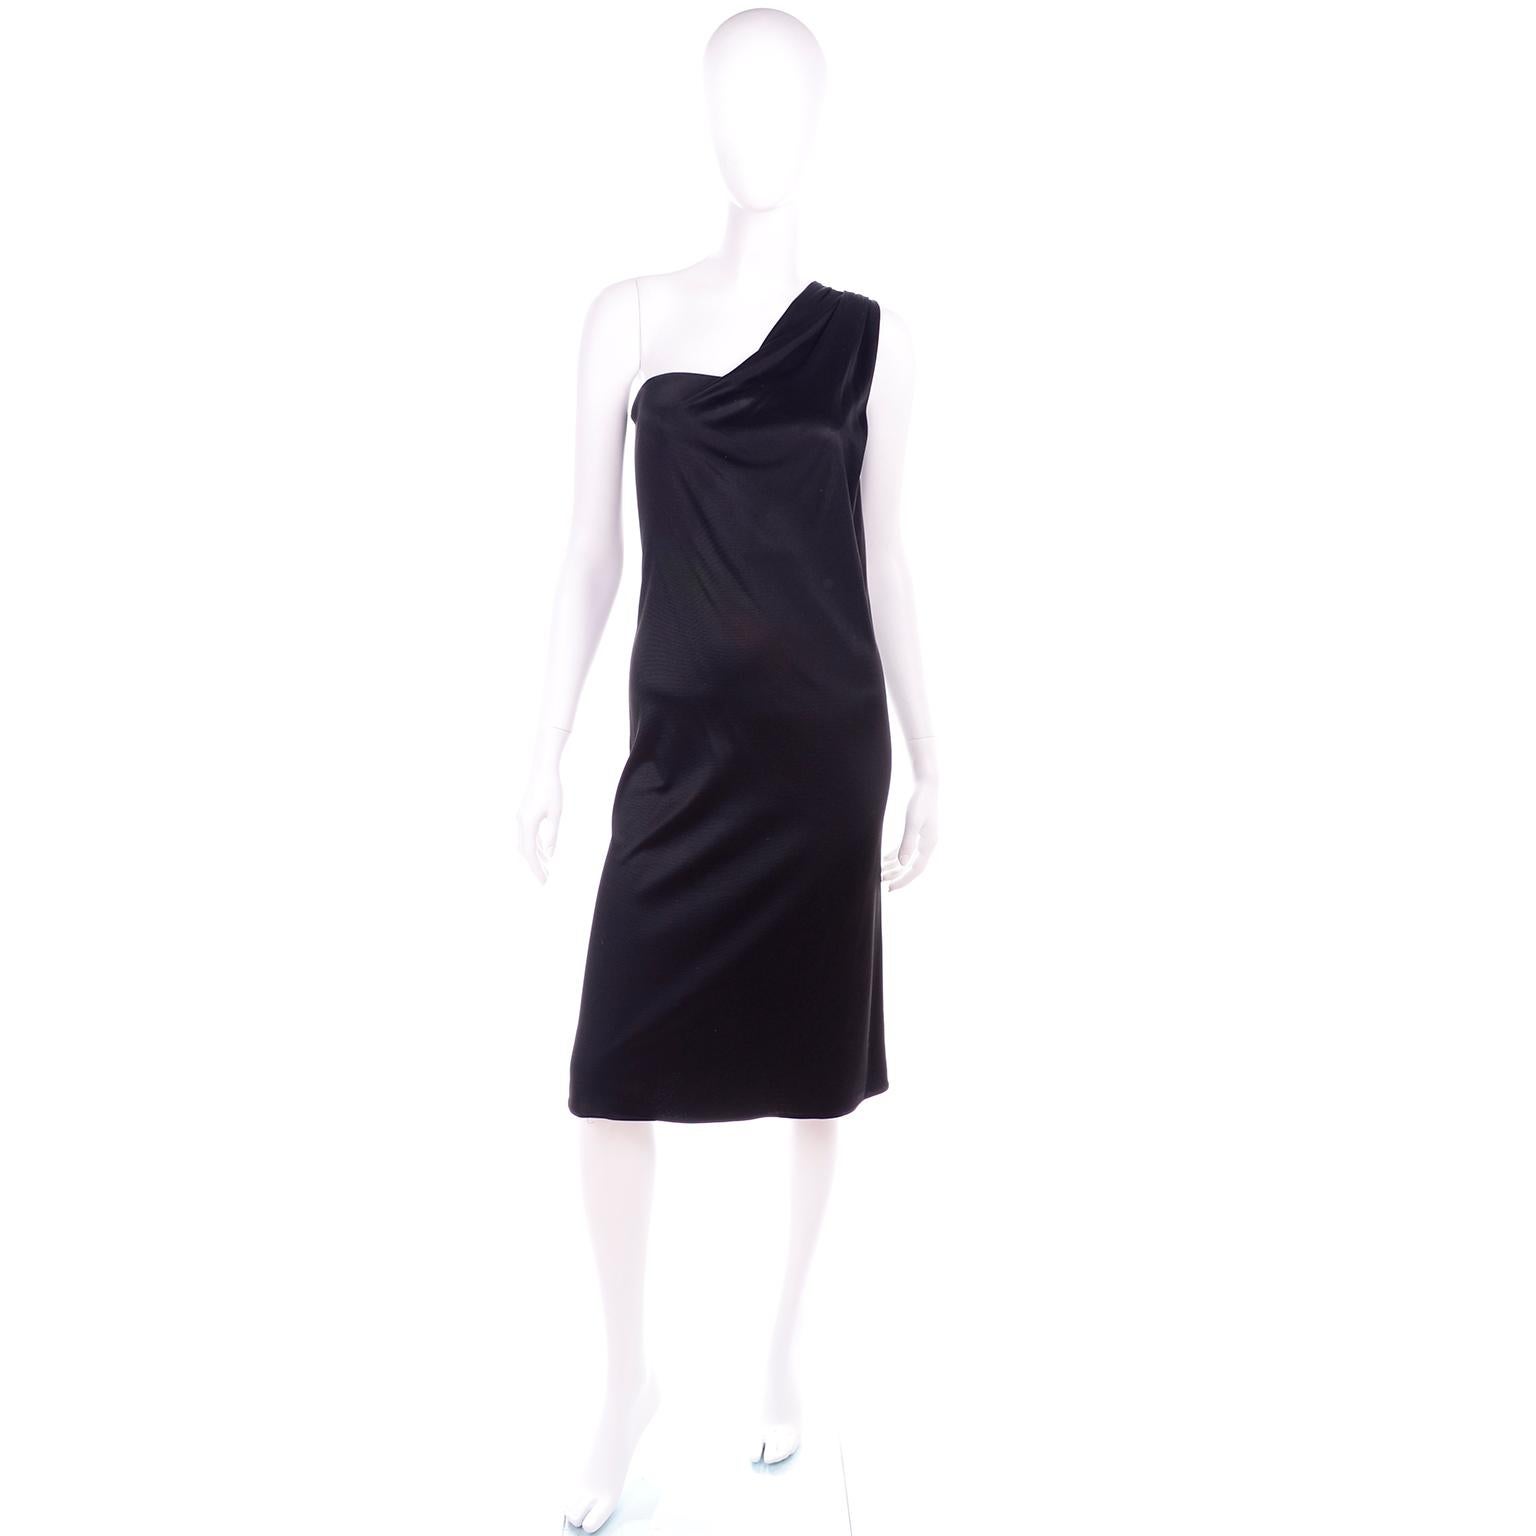 This is a fabulous little black dress from Versace's 1998 collection. This one shoulder 90's dress has a metal side zipper and a wire bustier insert. We love the leather and metal buckle in the back with the small medusa head. The dress is in a